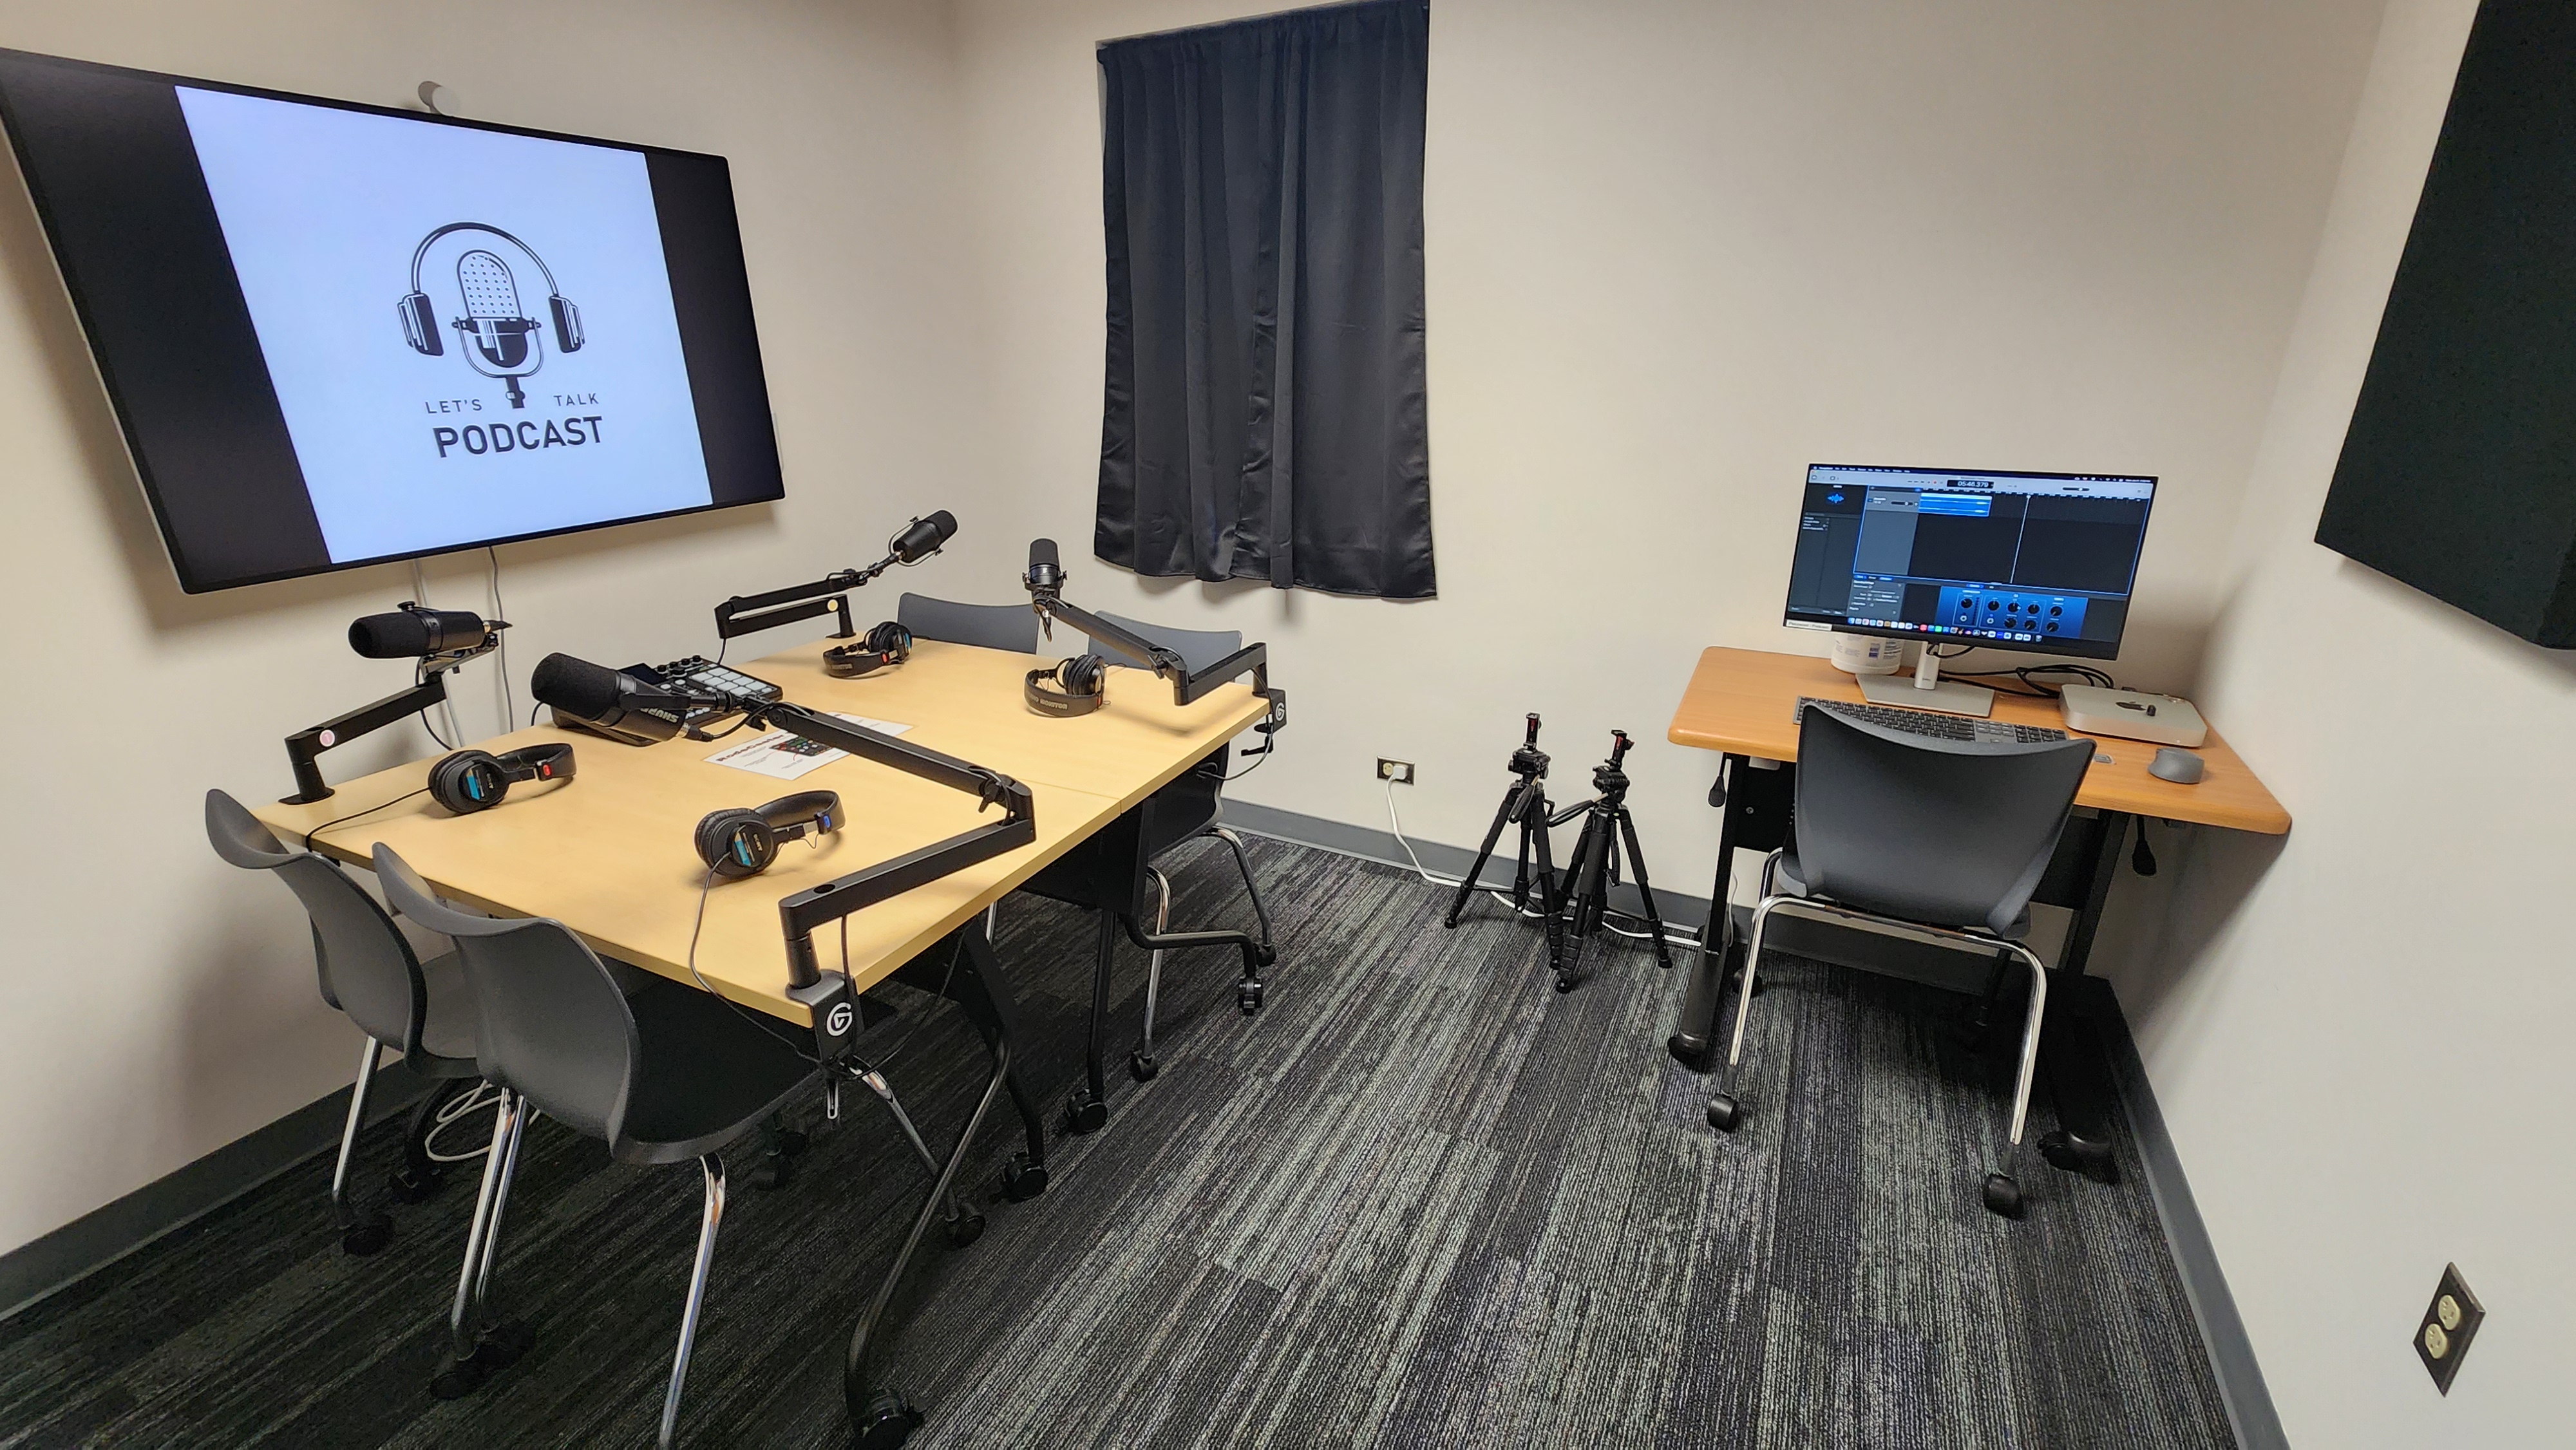 Podcasting Room with display, microphones, and editing software.